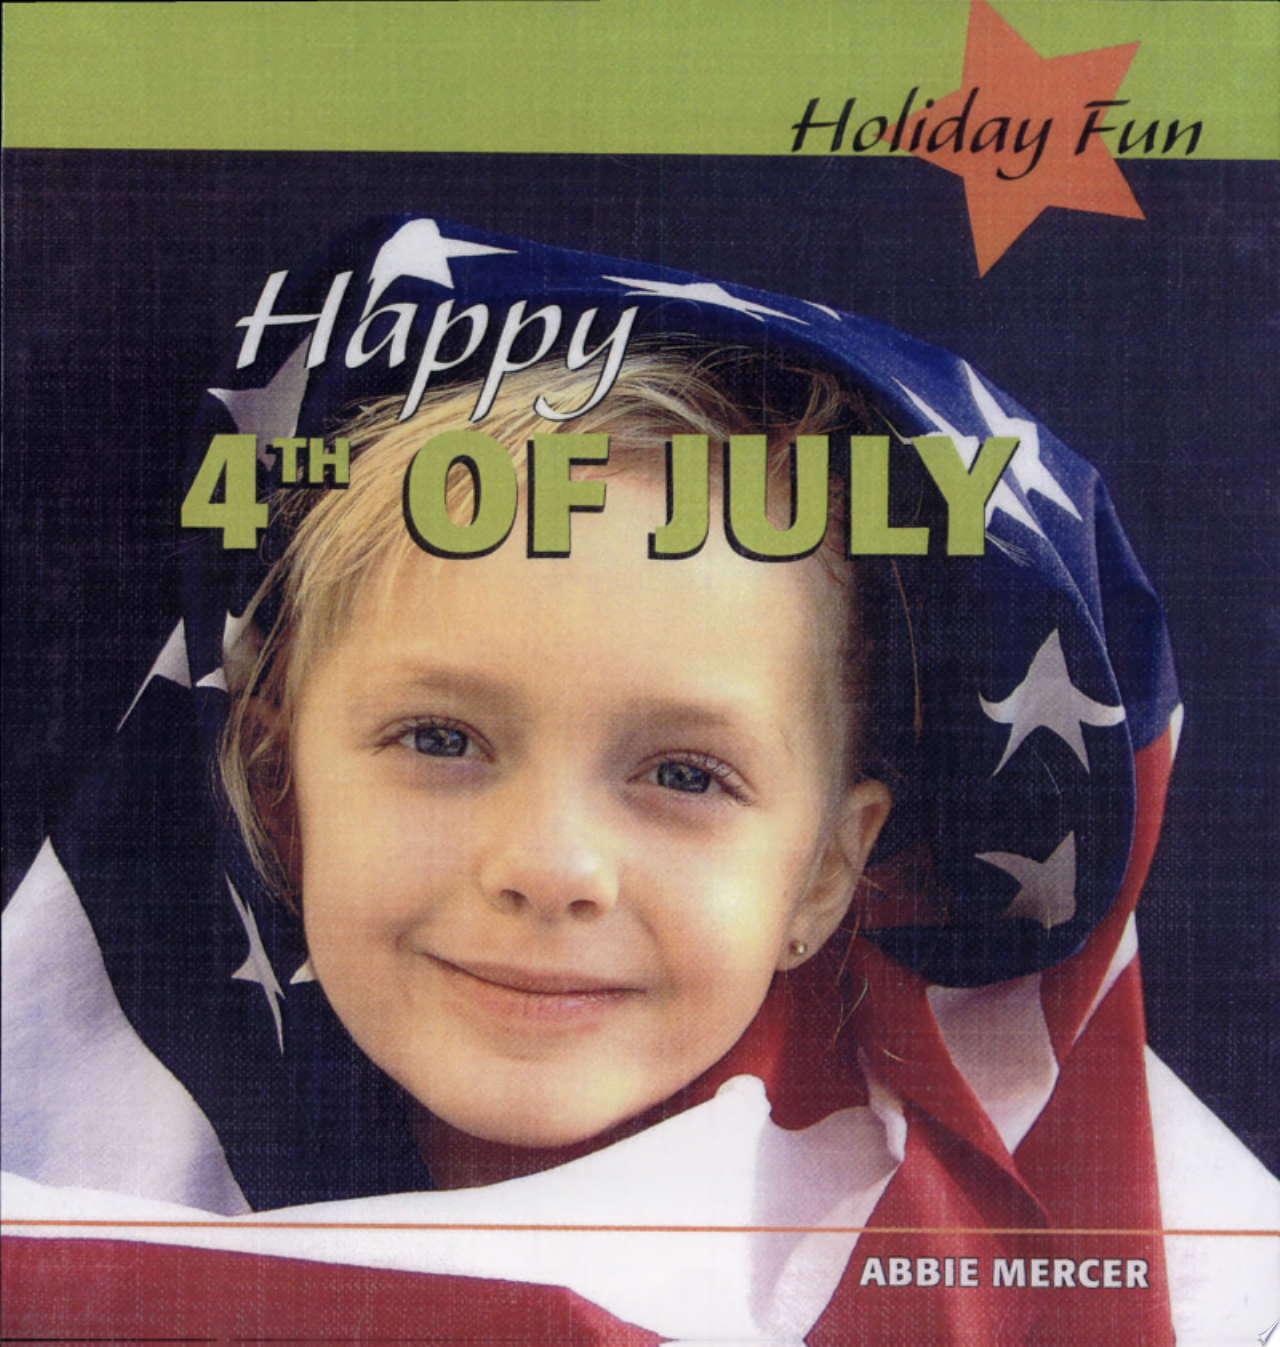 Image for "Happy 4th of July"